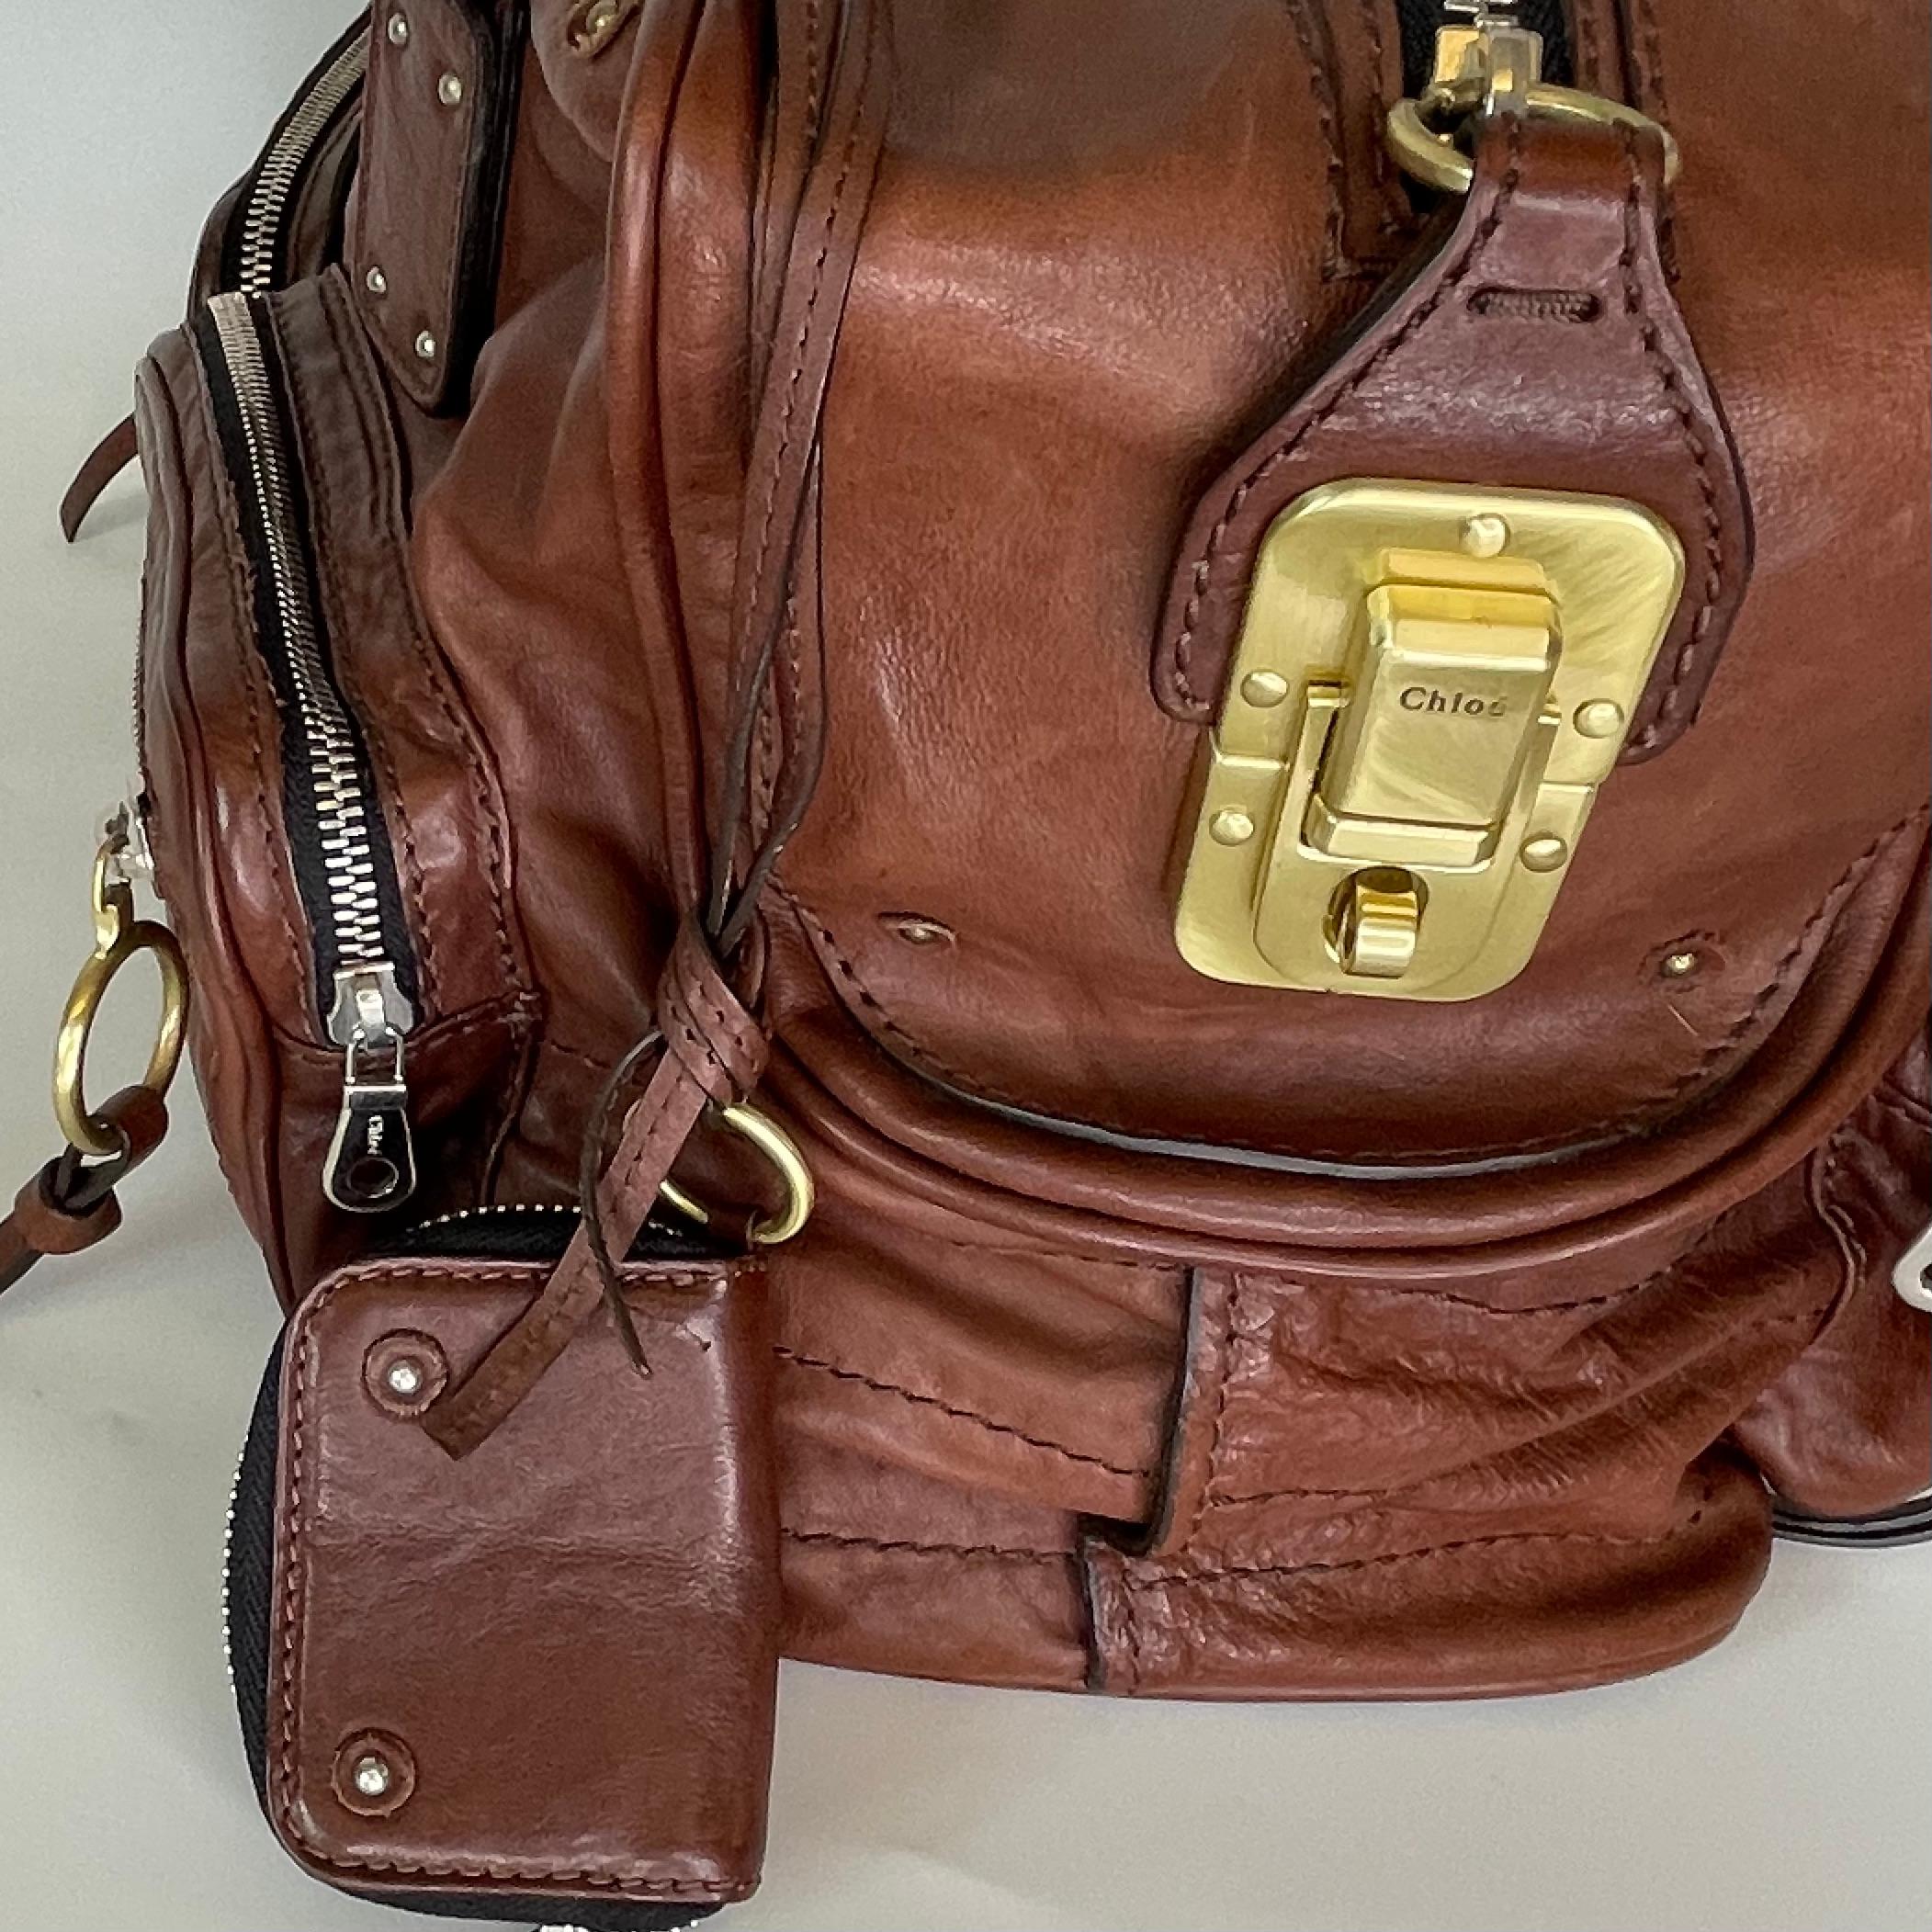 Chloe Brown Leather Betty Shoulder Bag In Good Condition For Sale In Montreal, Quebec